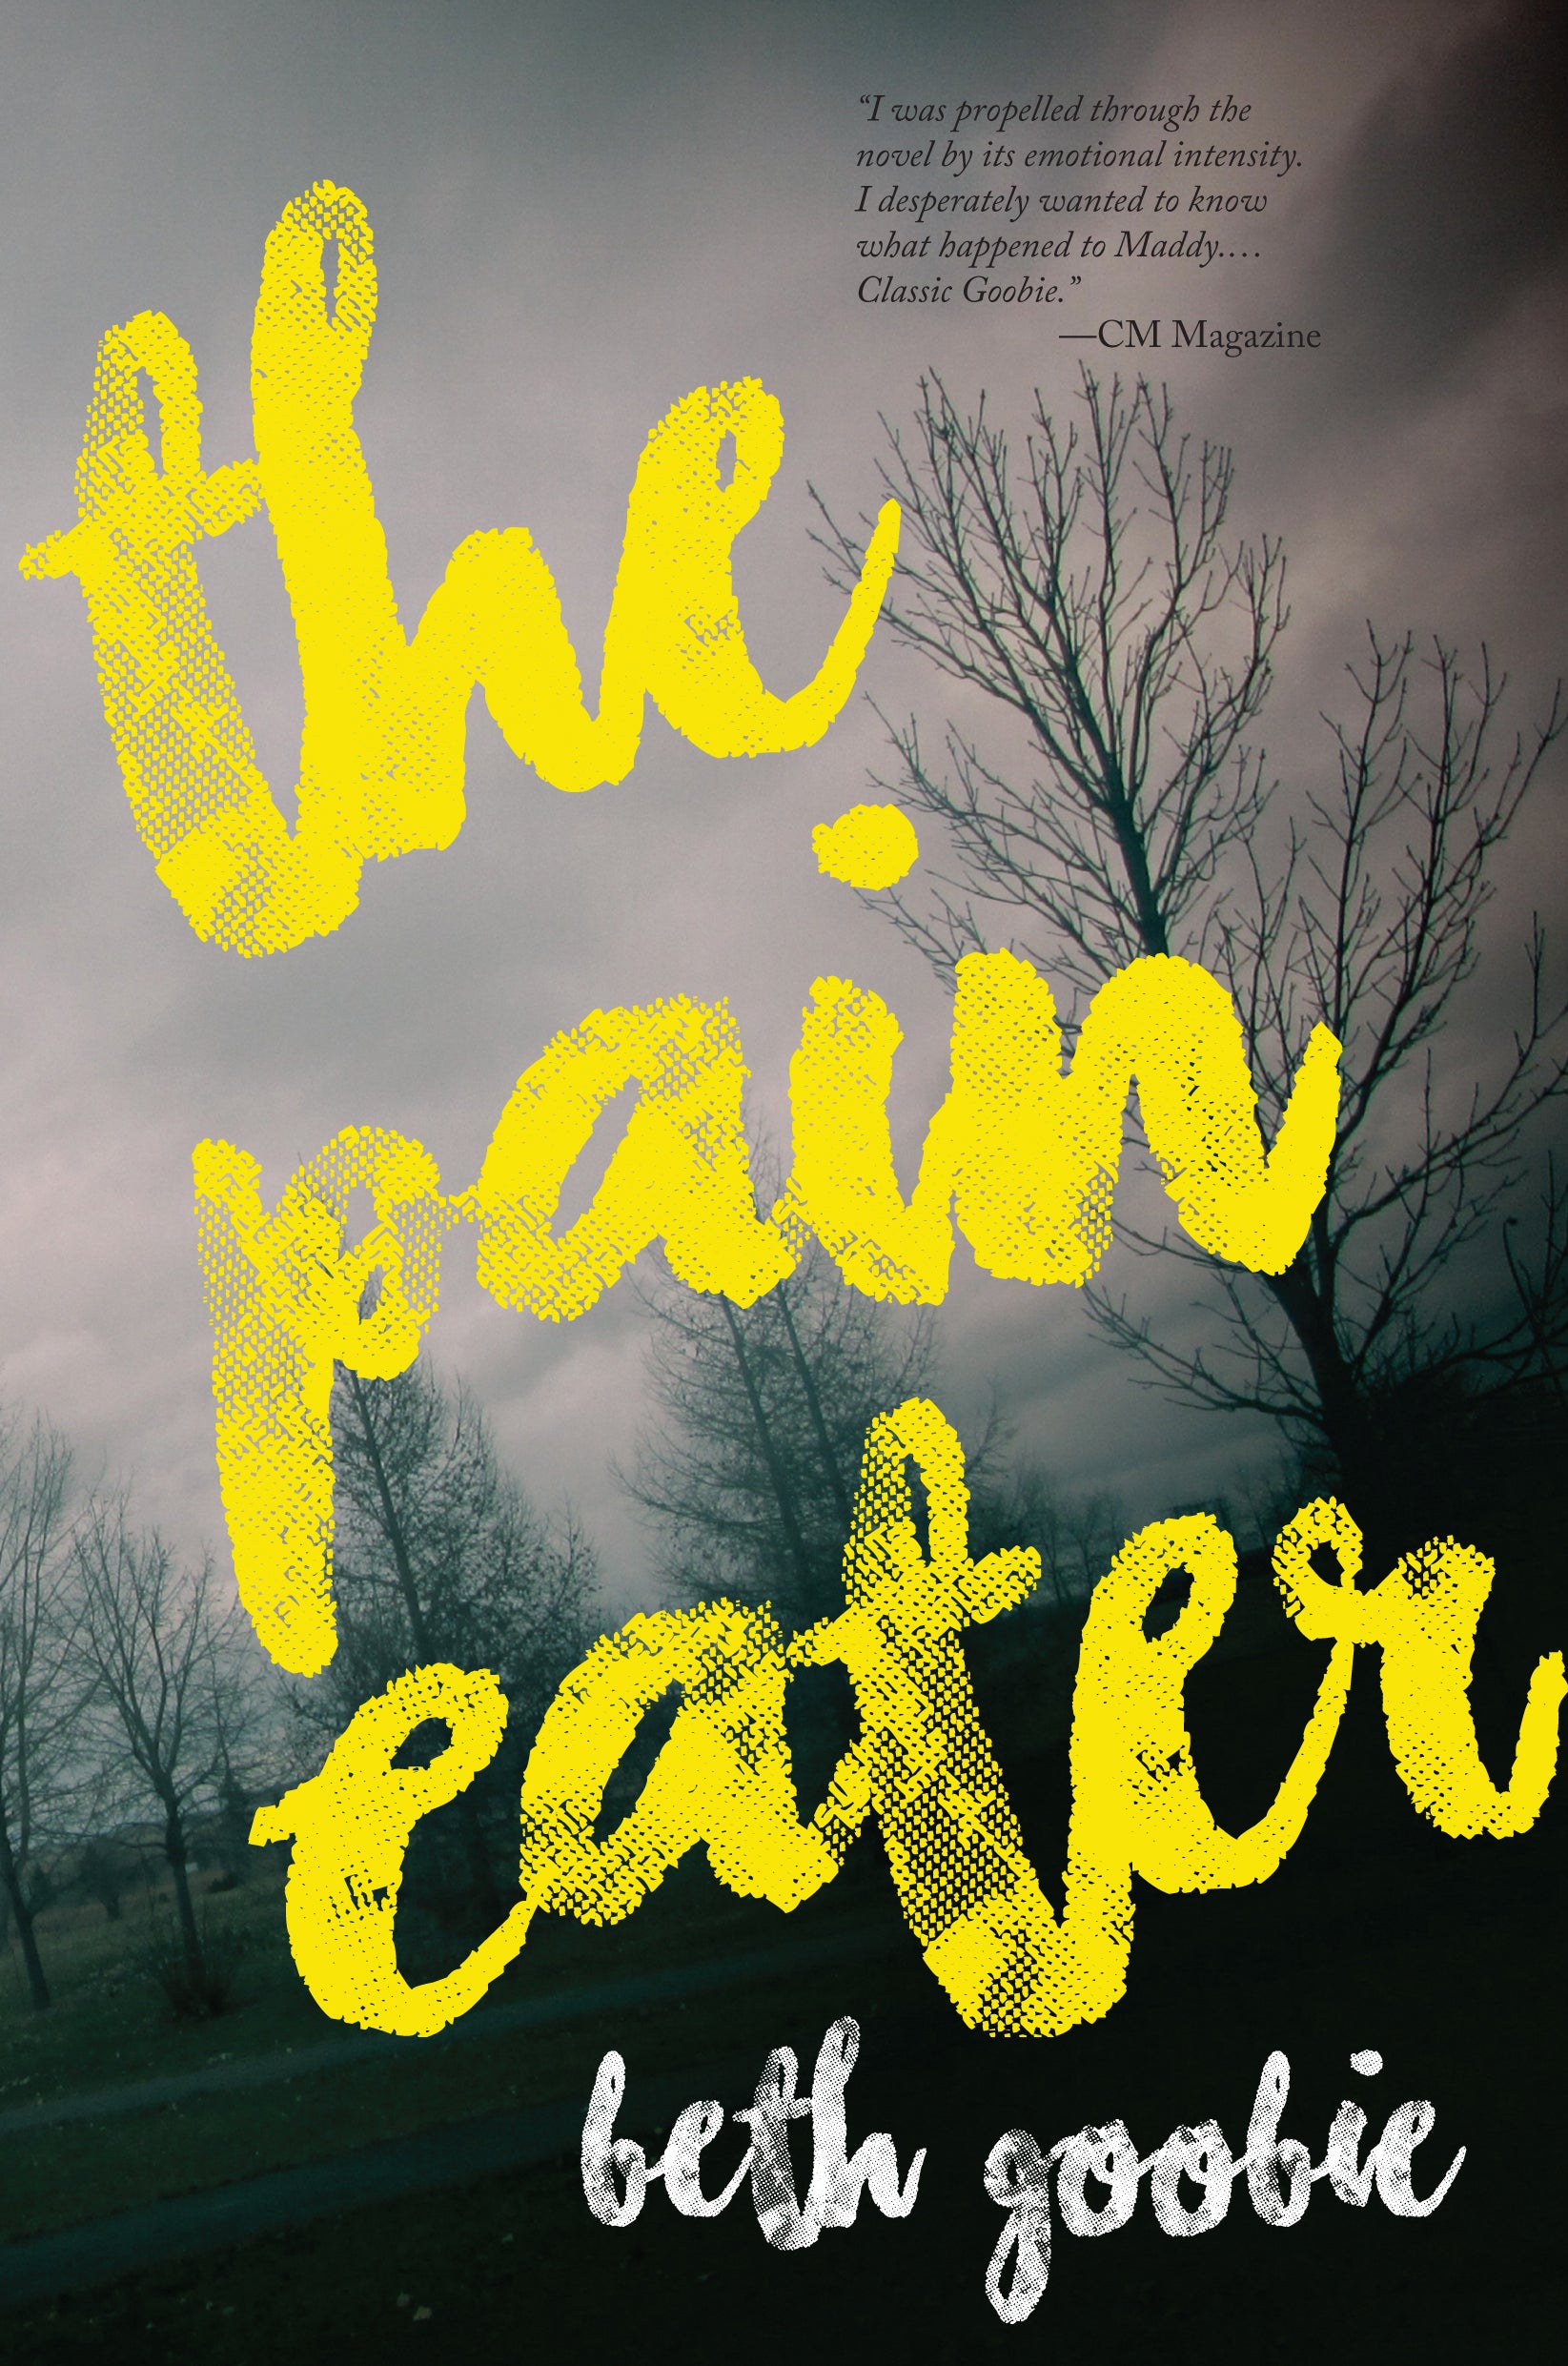 The Pain Eater